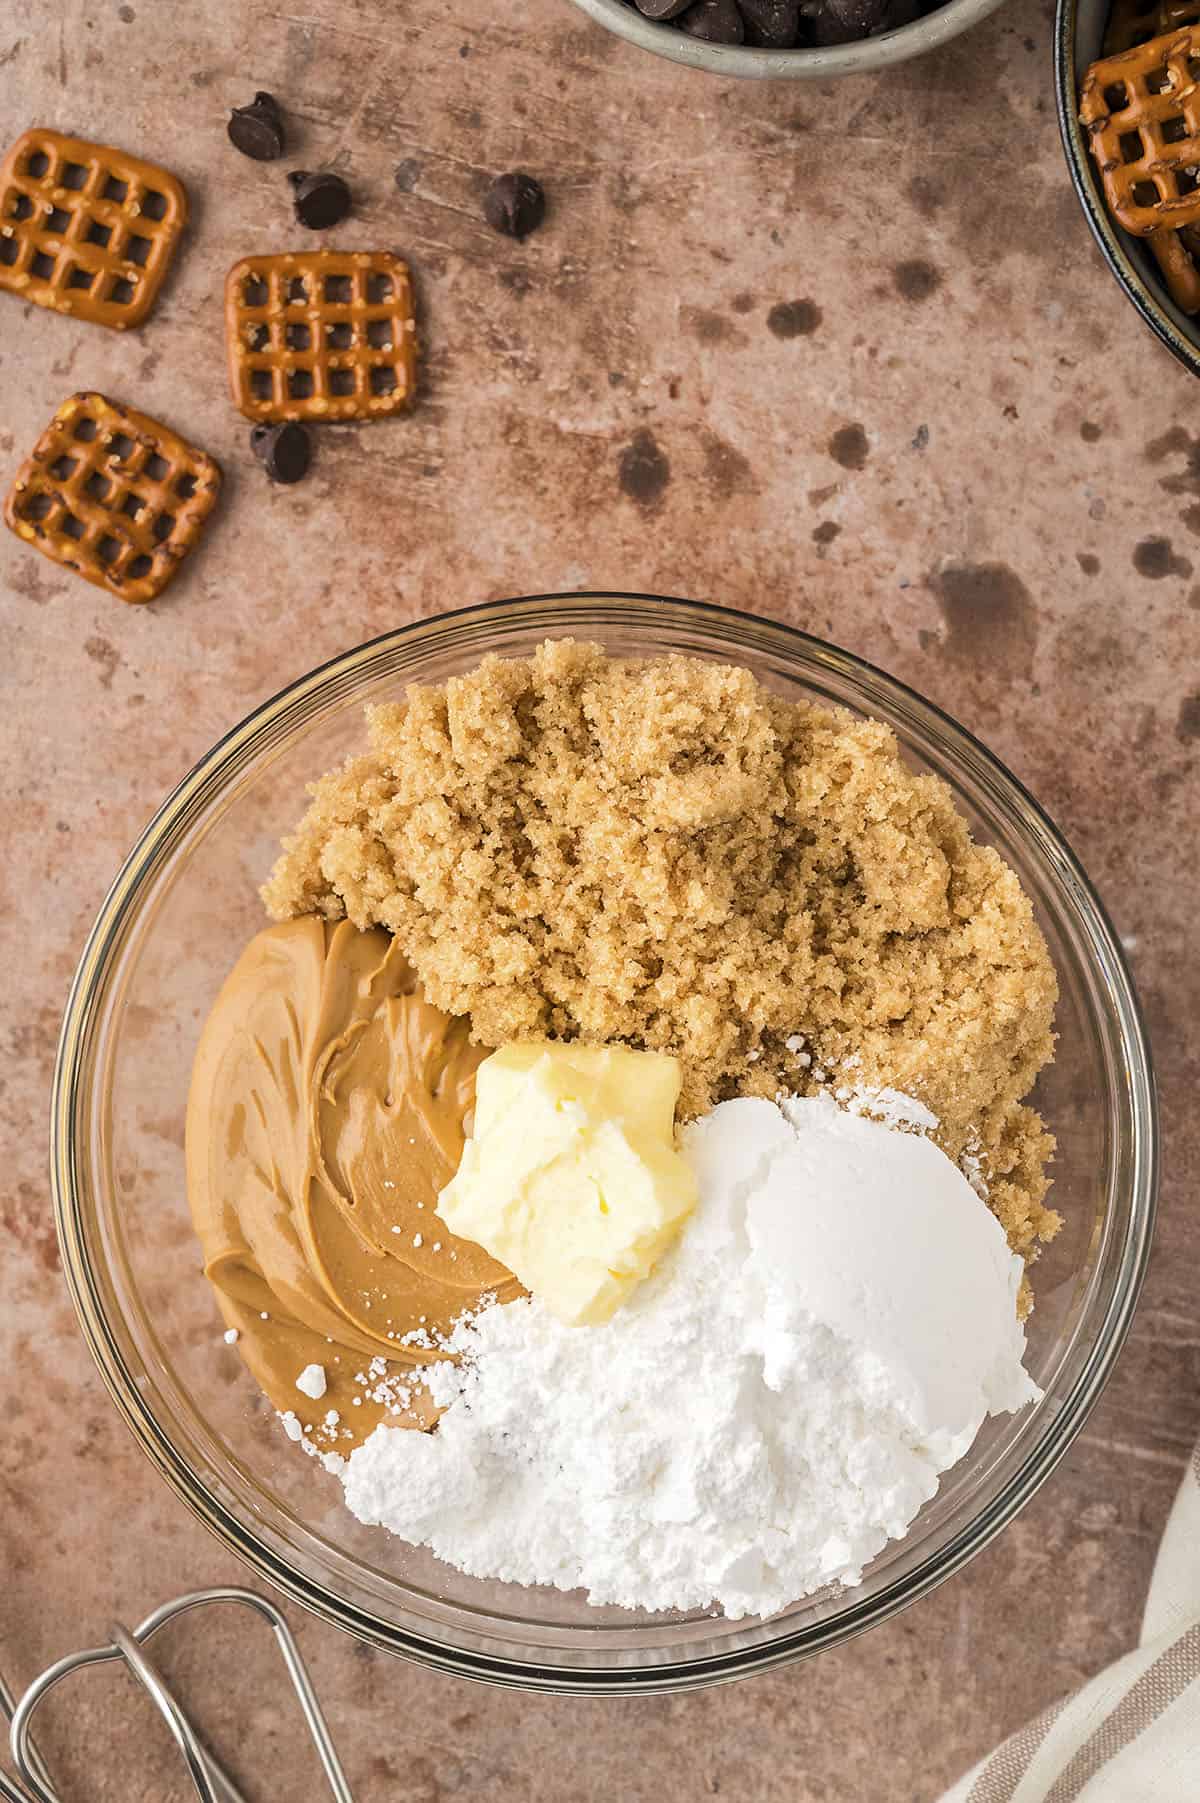 Ingredients for peanut butter balls in mixing bowl.